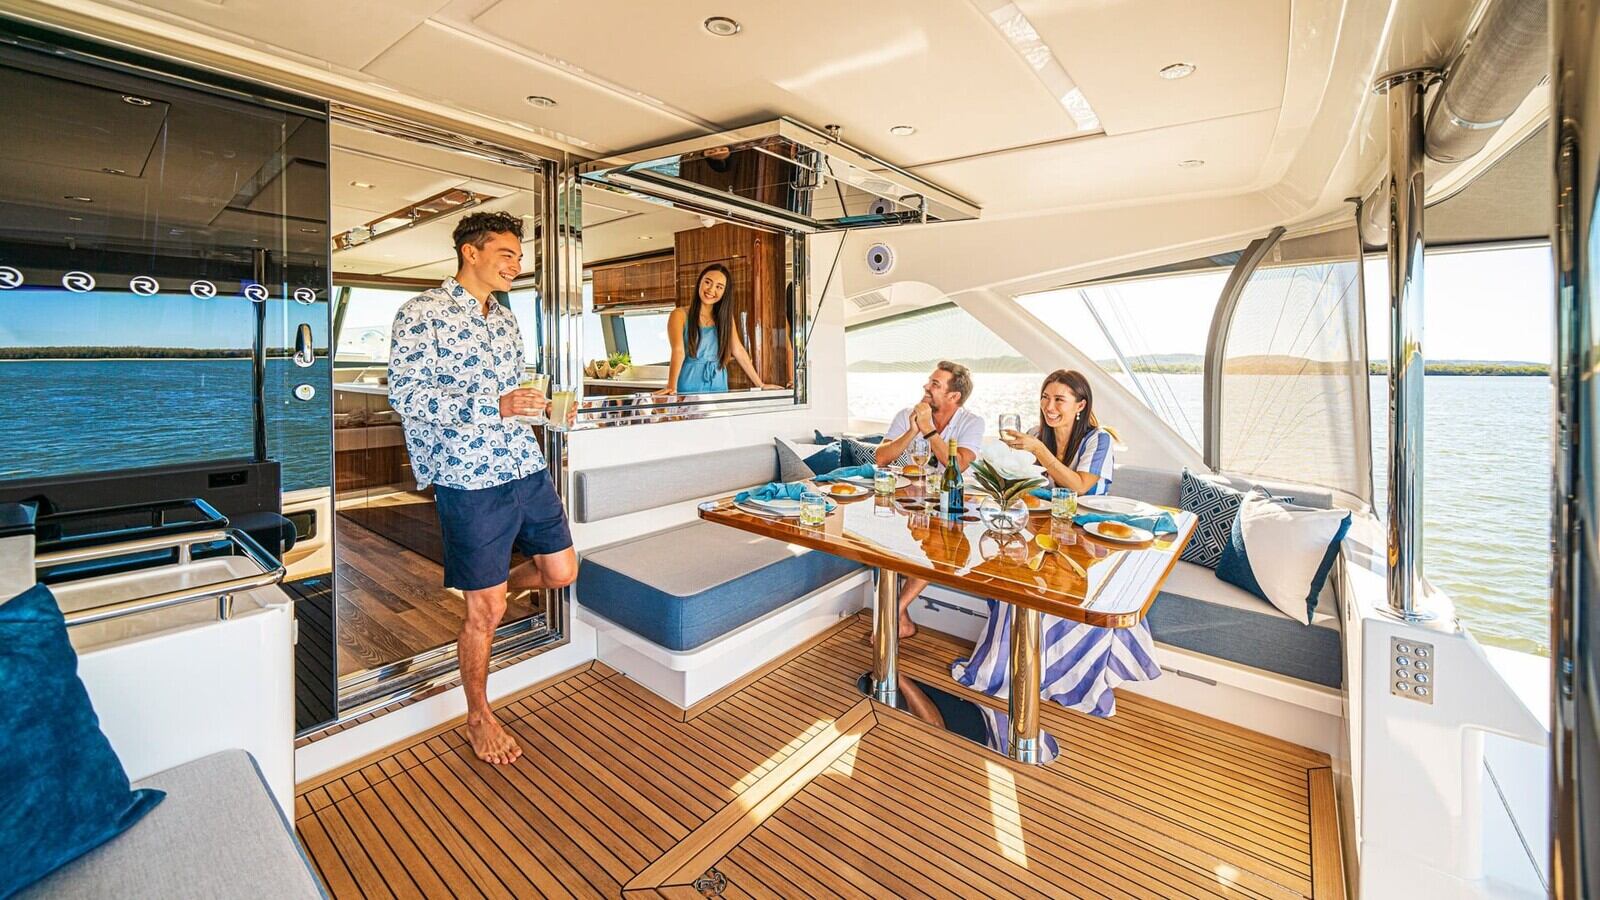 who-owns-the-yacht-named-staycation